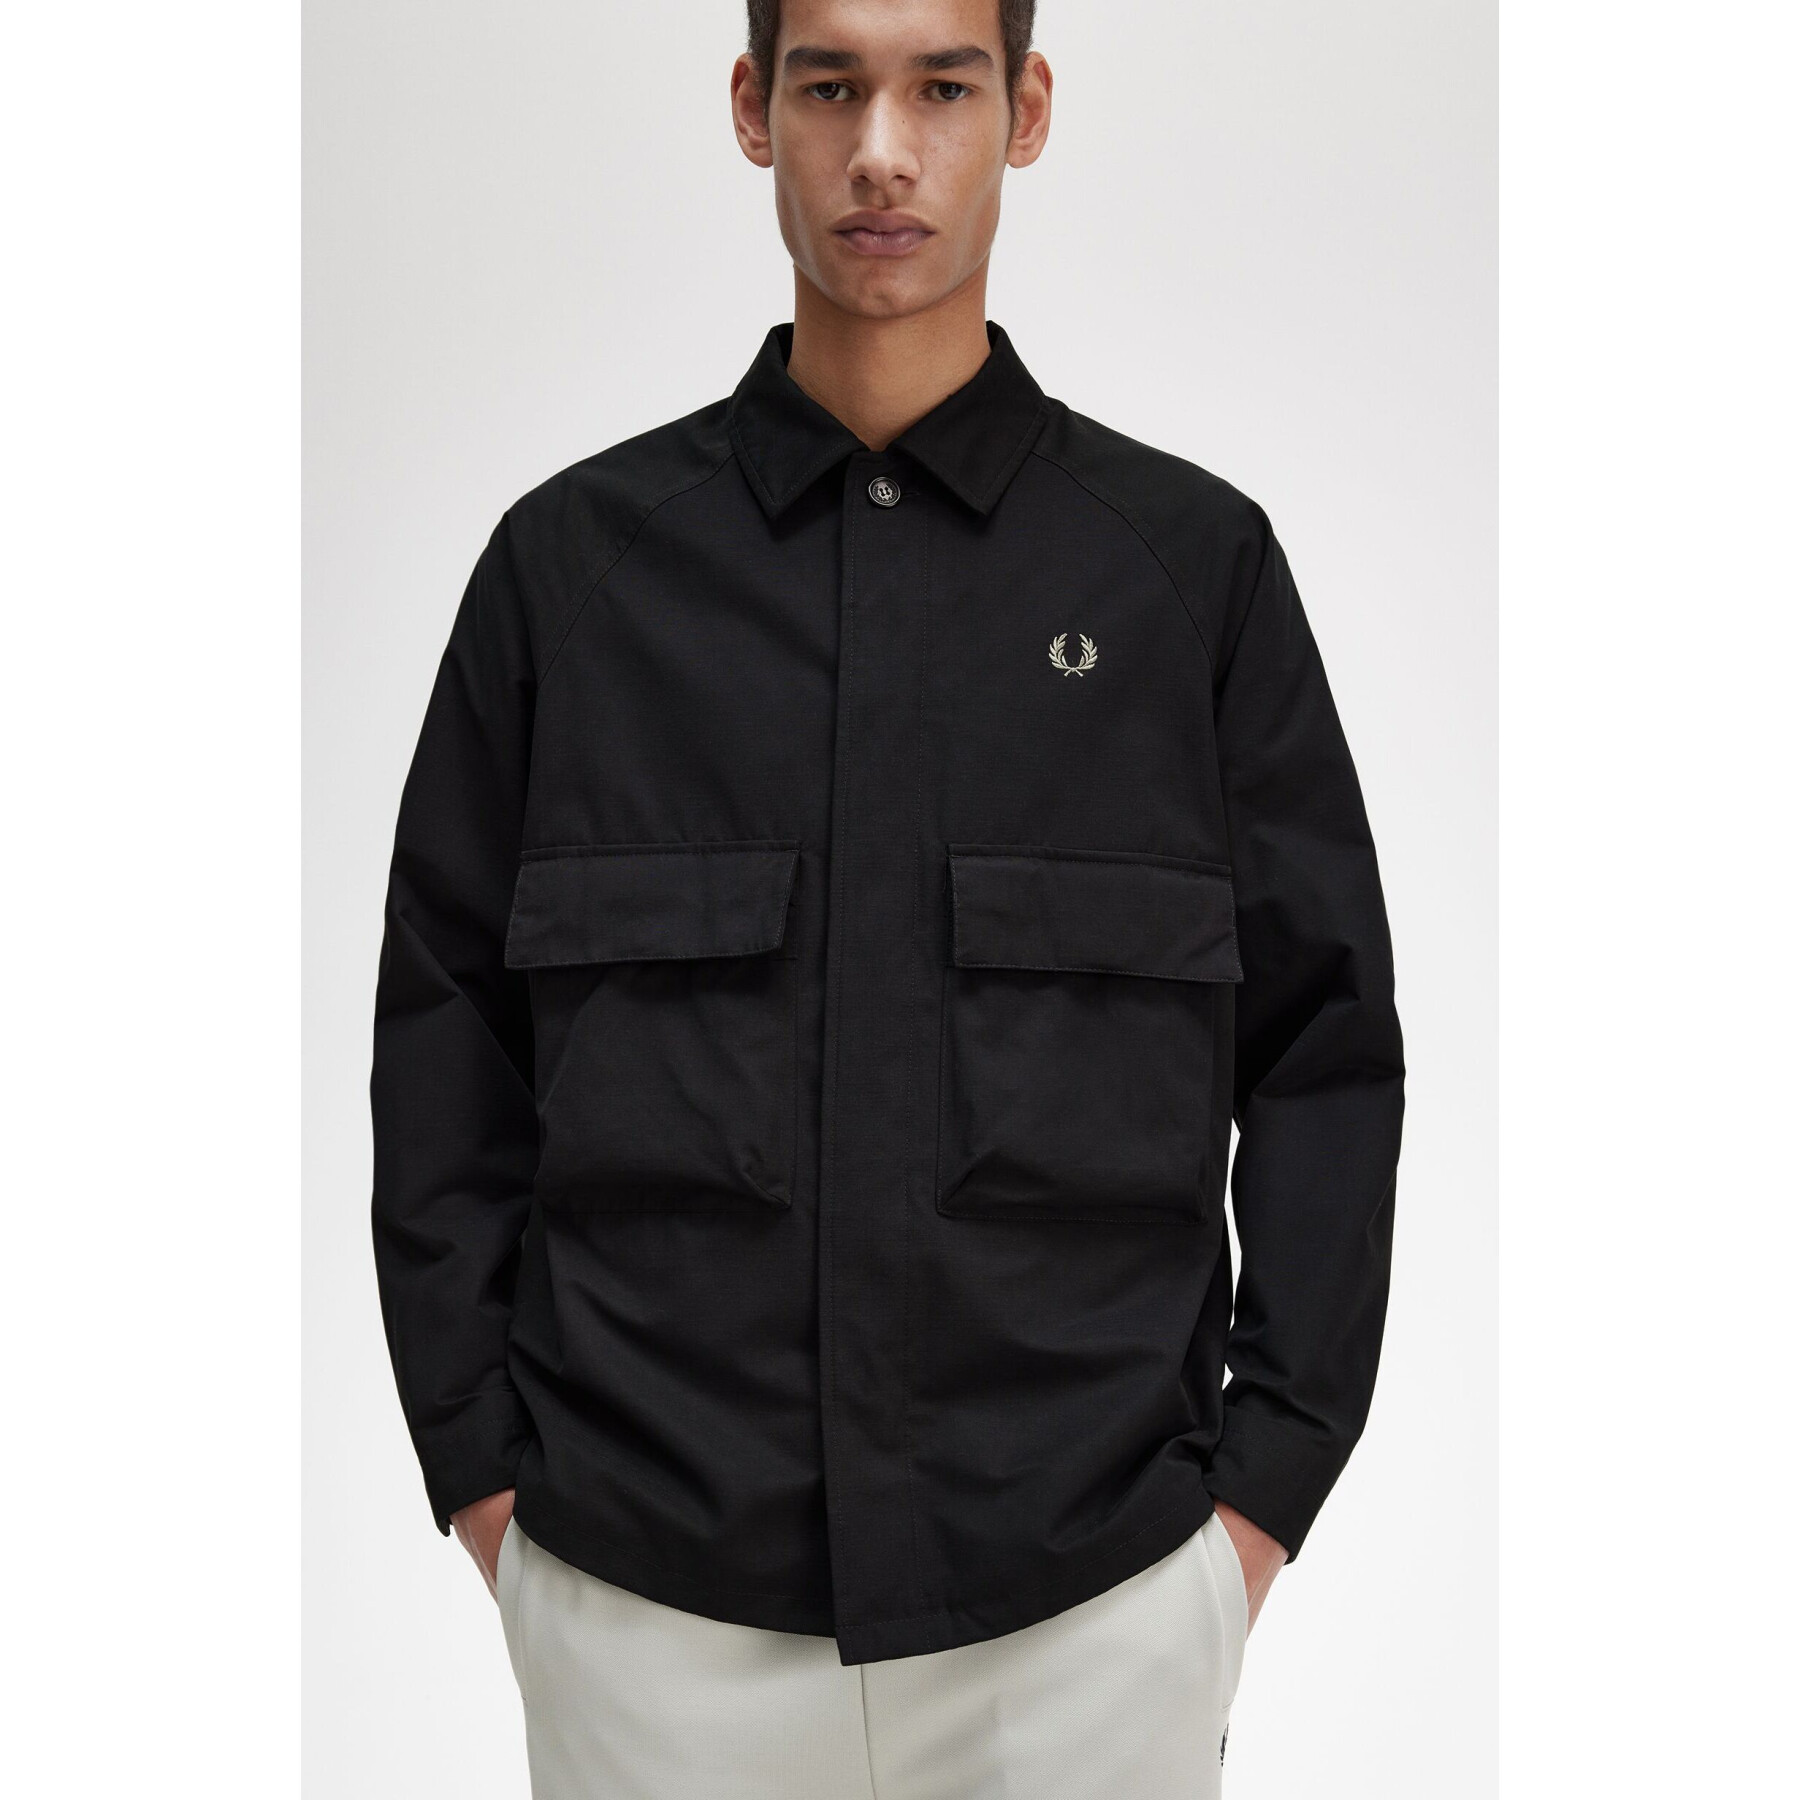 Overhemd Fred Perry Utility